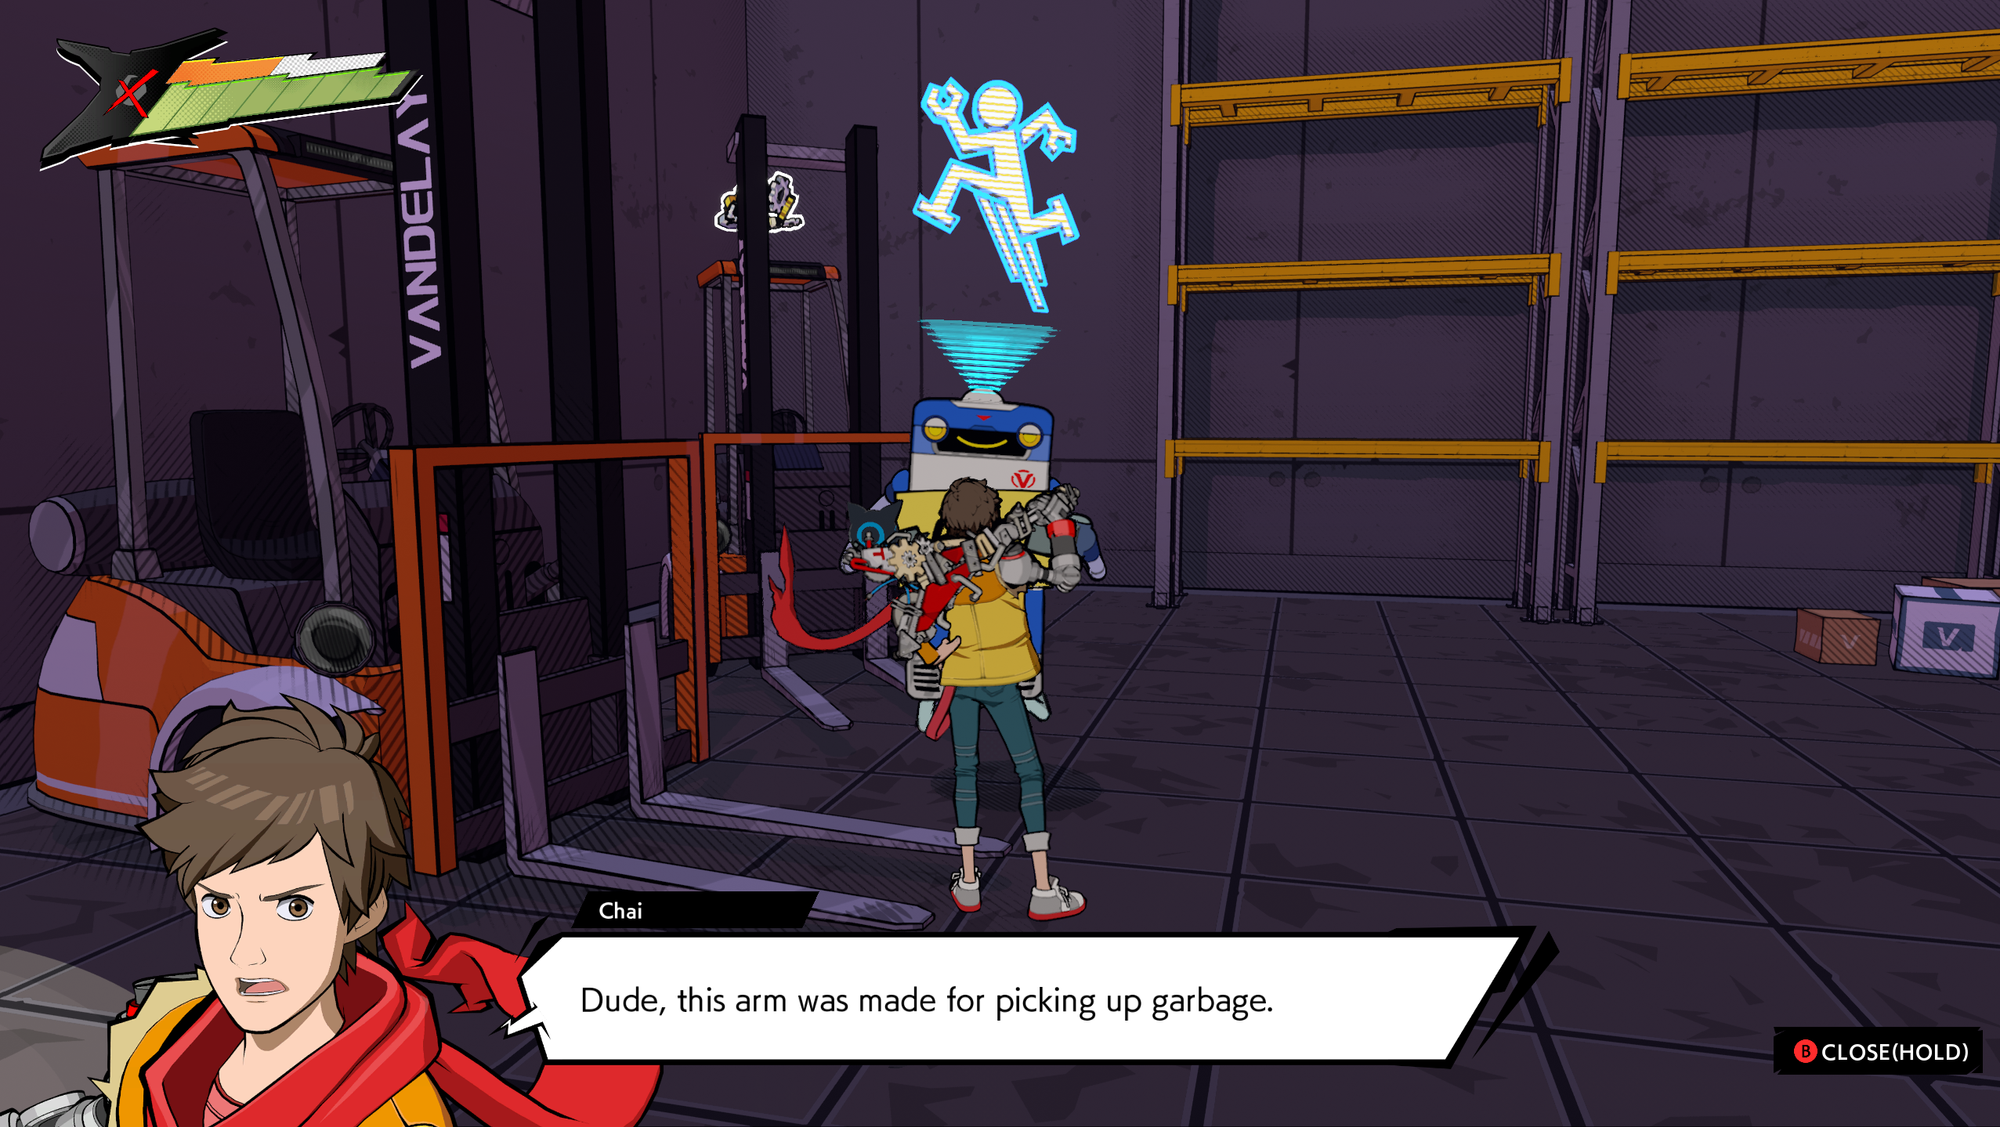 The player character Chai talking to the hint bot.